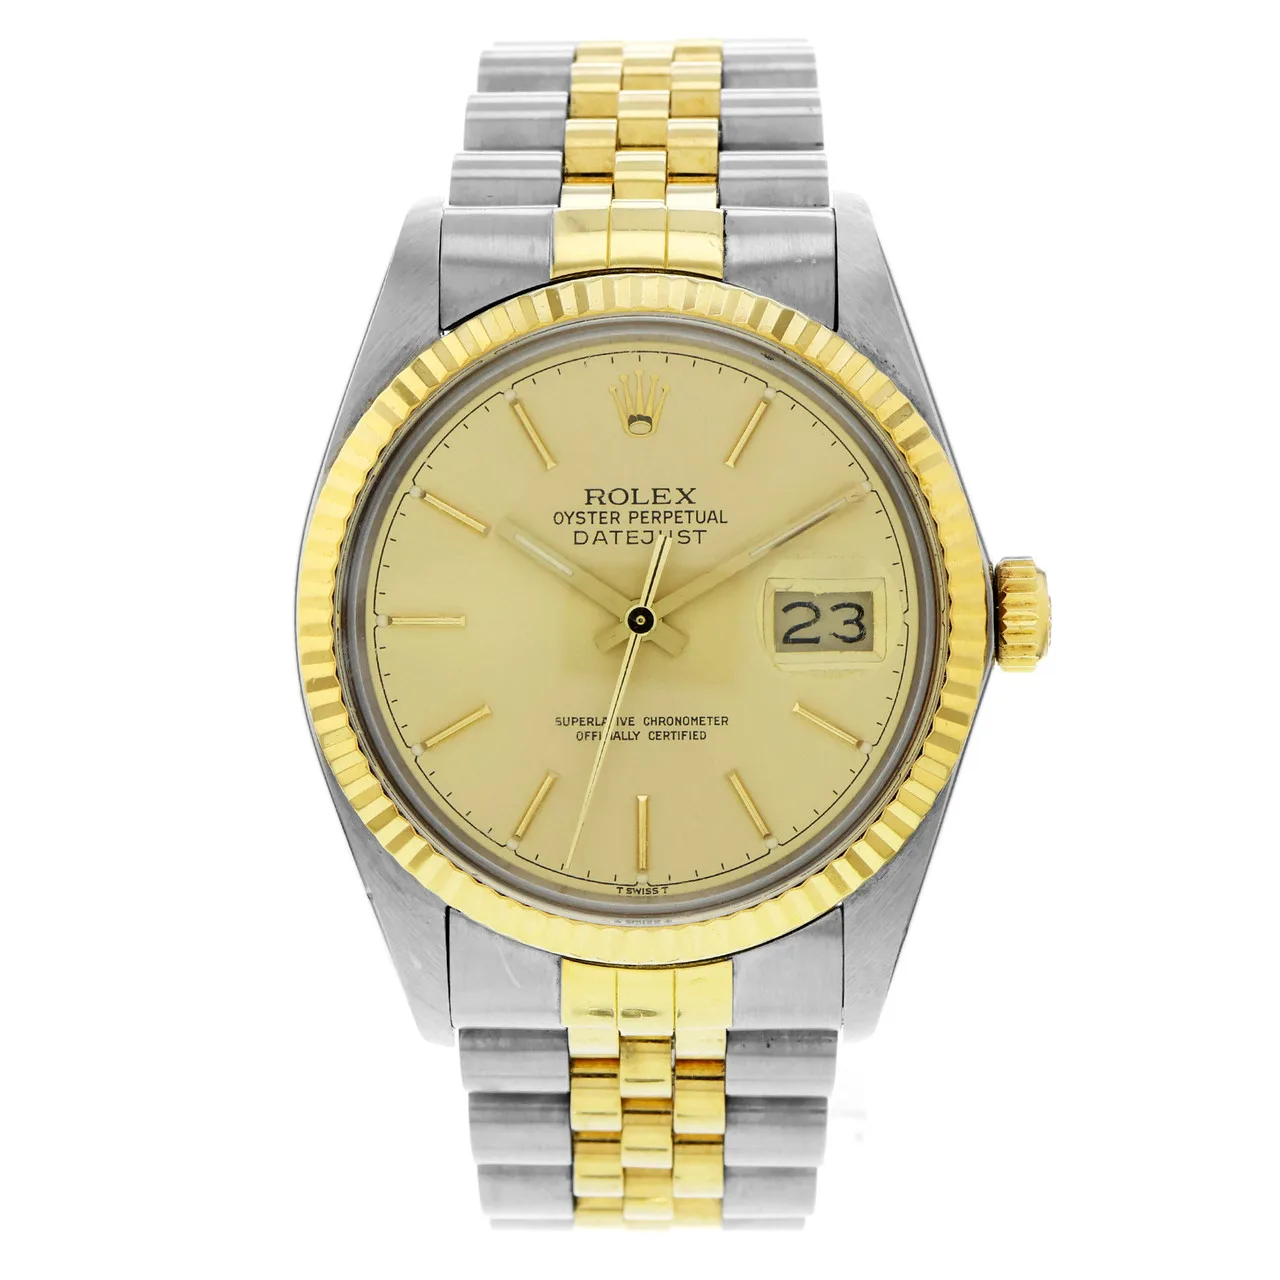 1986 Rolex Datejust Two-Tone / Fluted / Champagne / Jubilee 16013 Listing Image 1